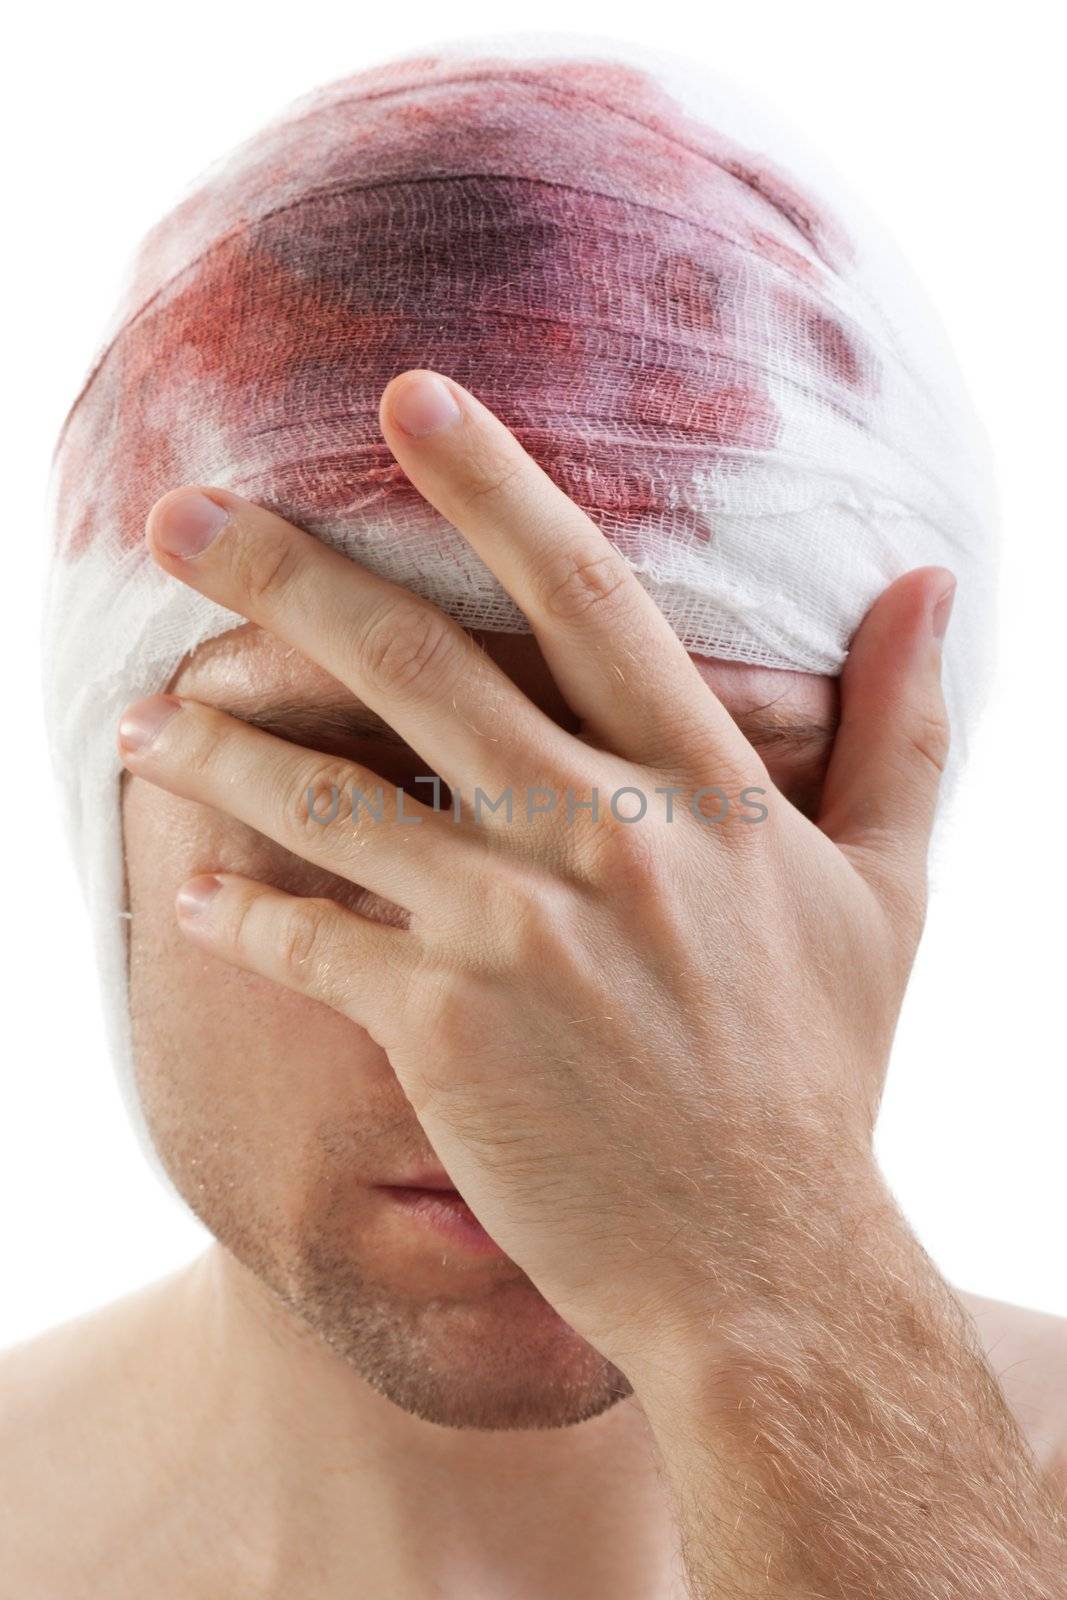 Bandage on human brain concussion blood wound head